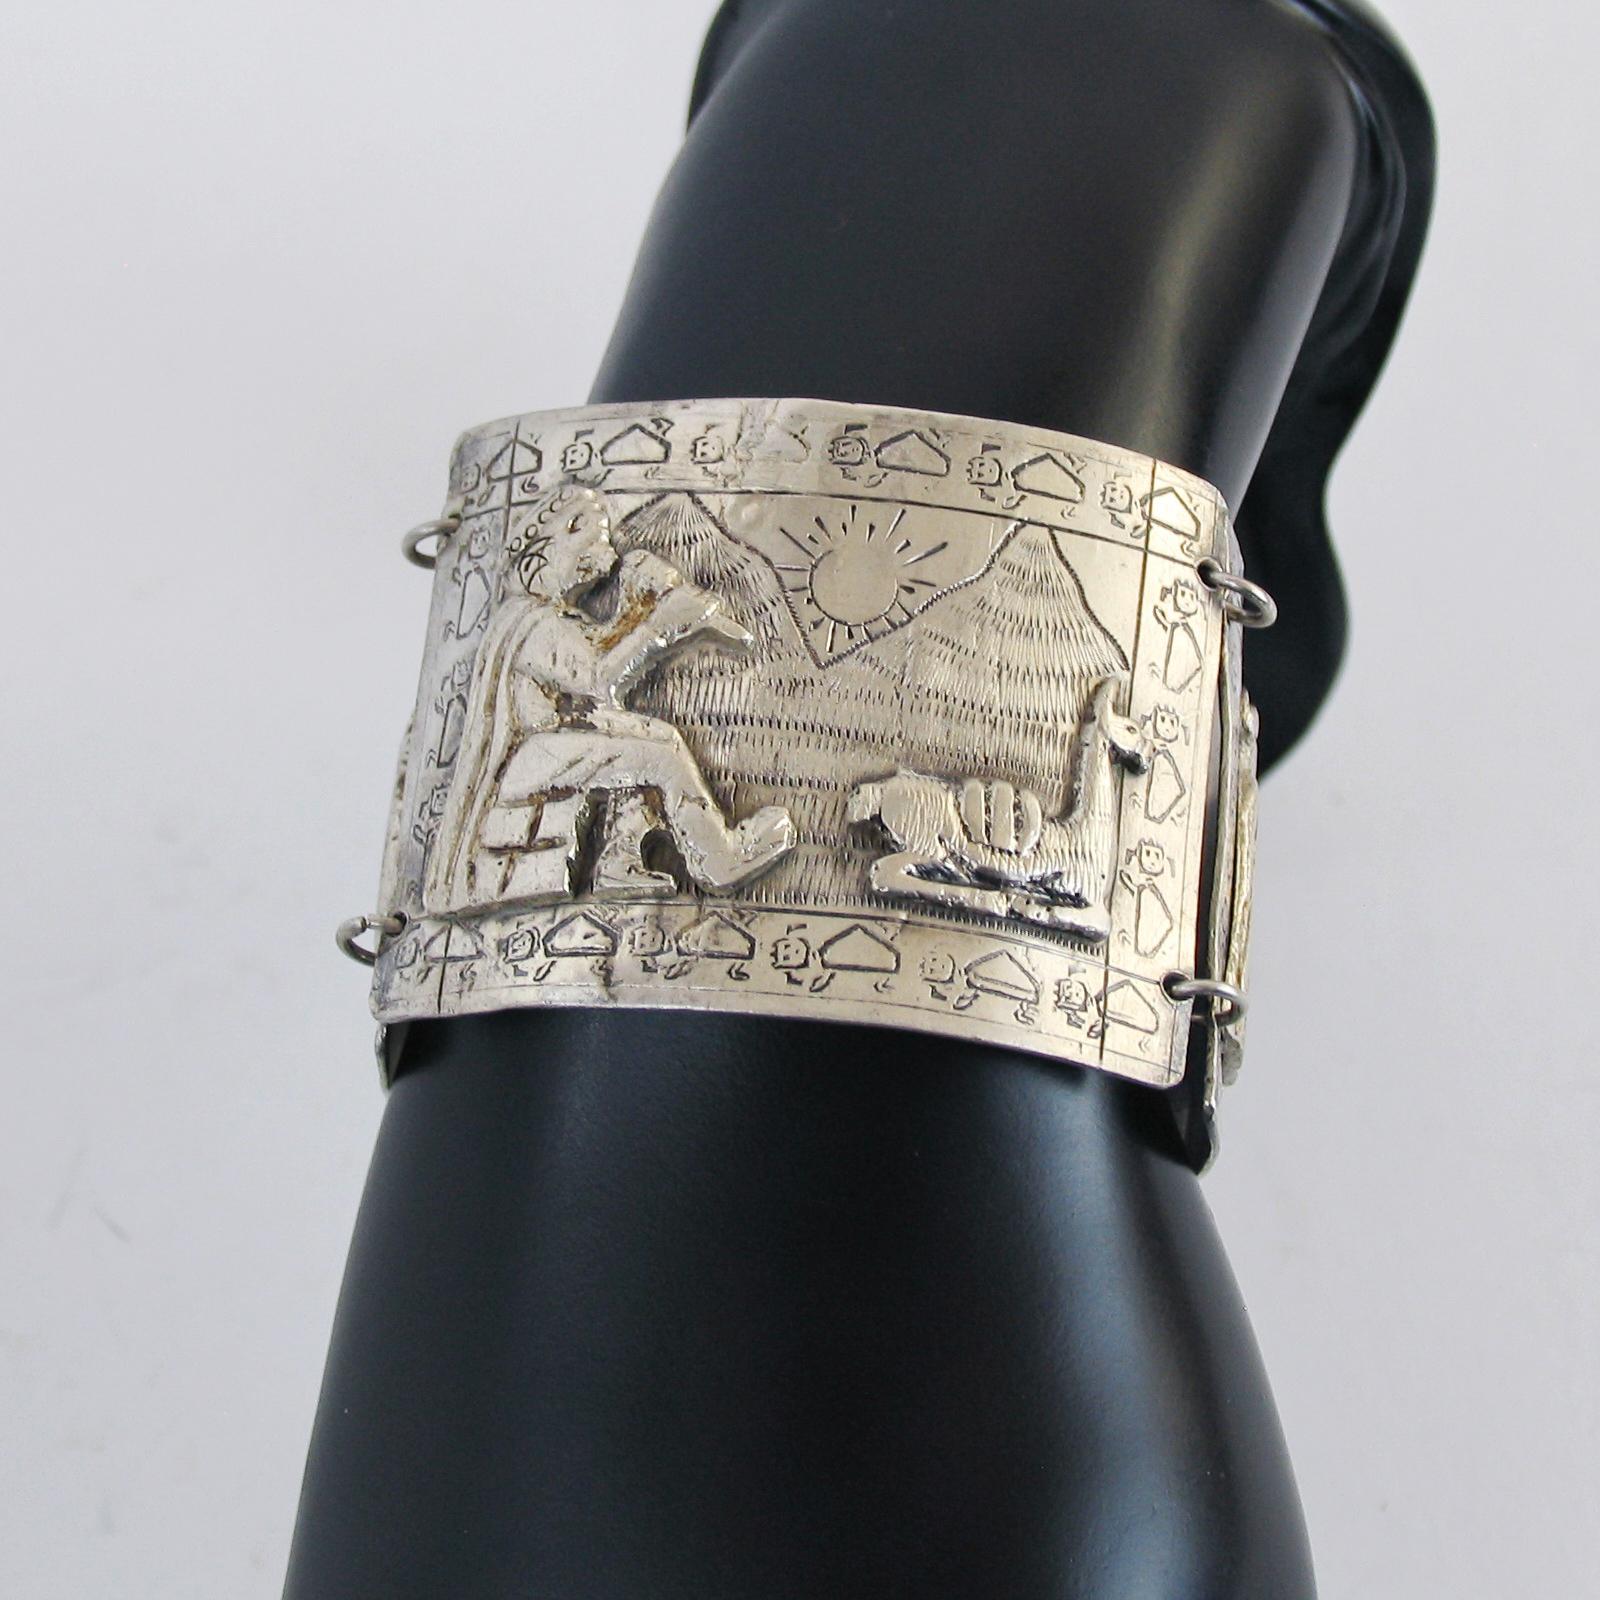 Hand-Crafted Vintage Peruvian Silver Bracelet from Industria Peruana, 1920s